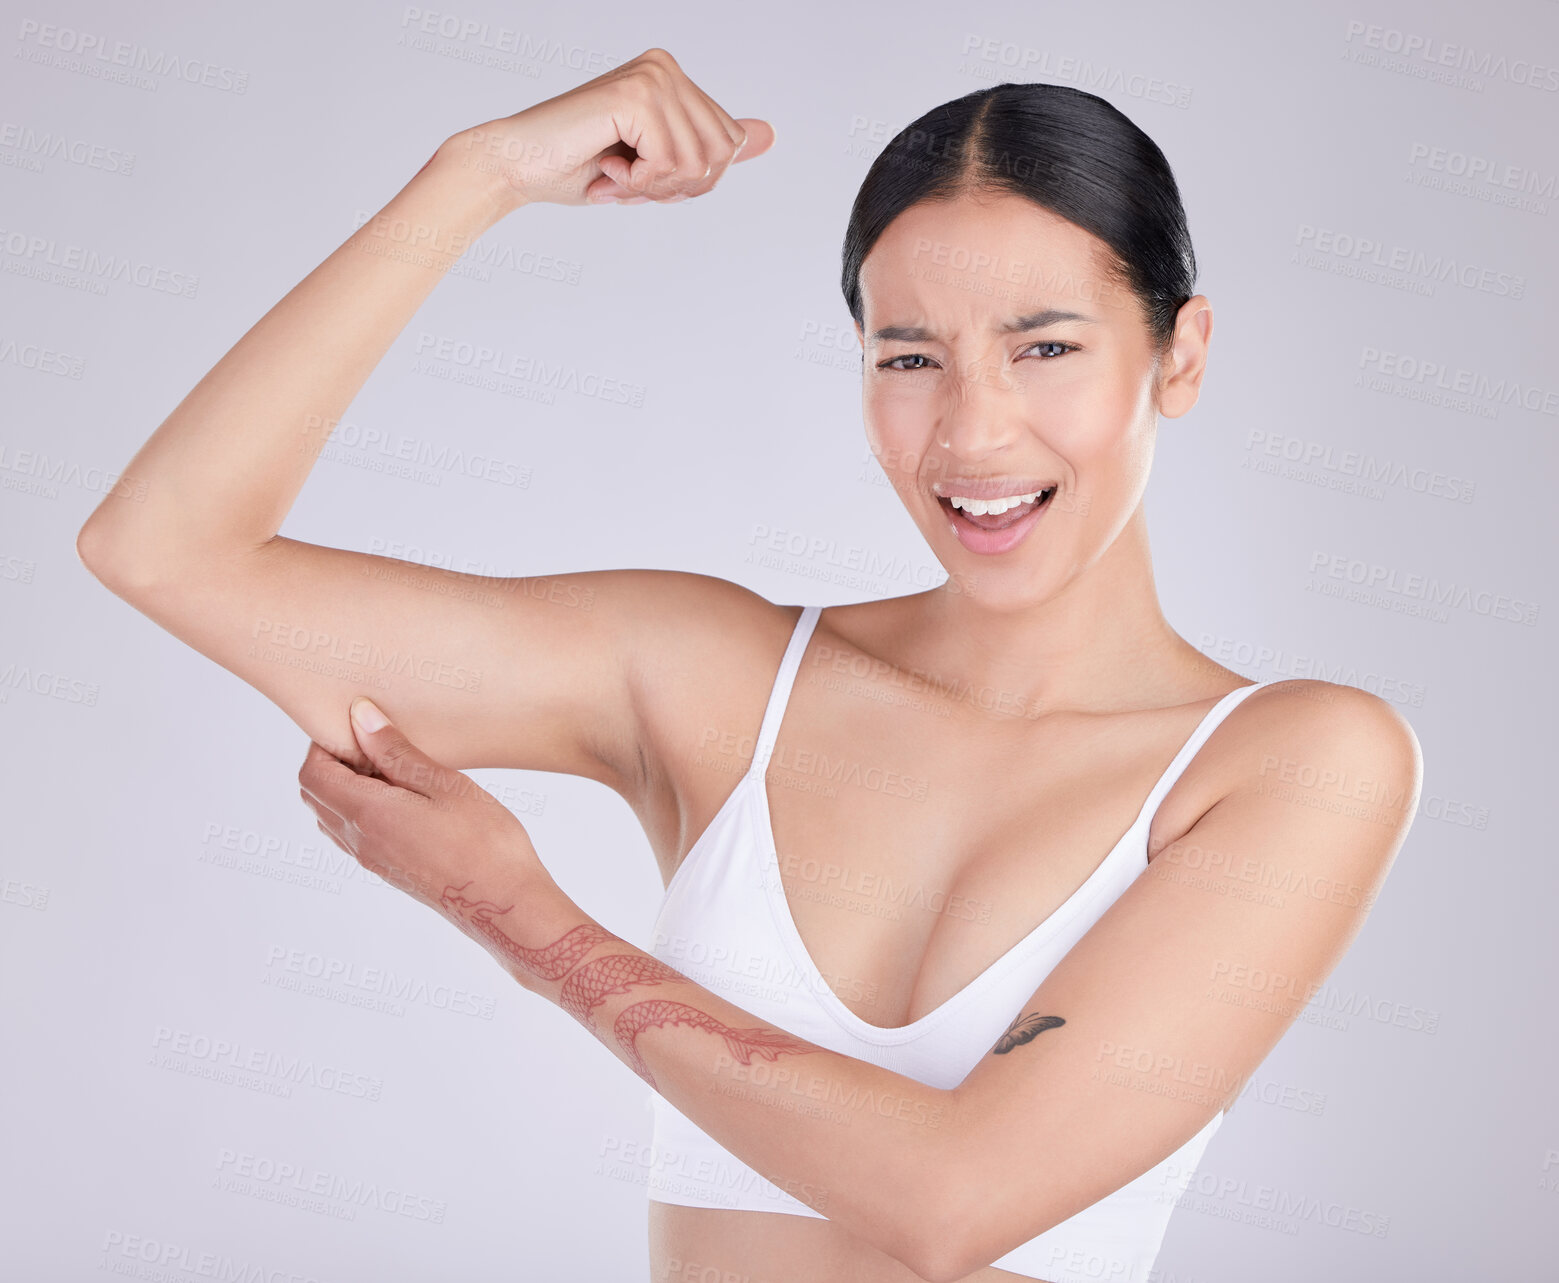 Buy stock photo Shot of an attractive young woman standing and tugging at excess skin on her arm